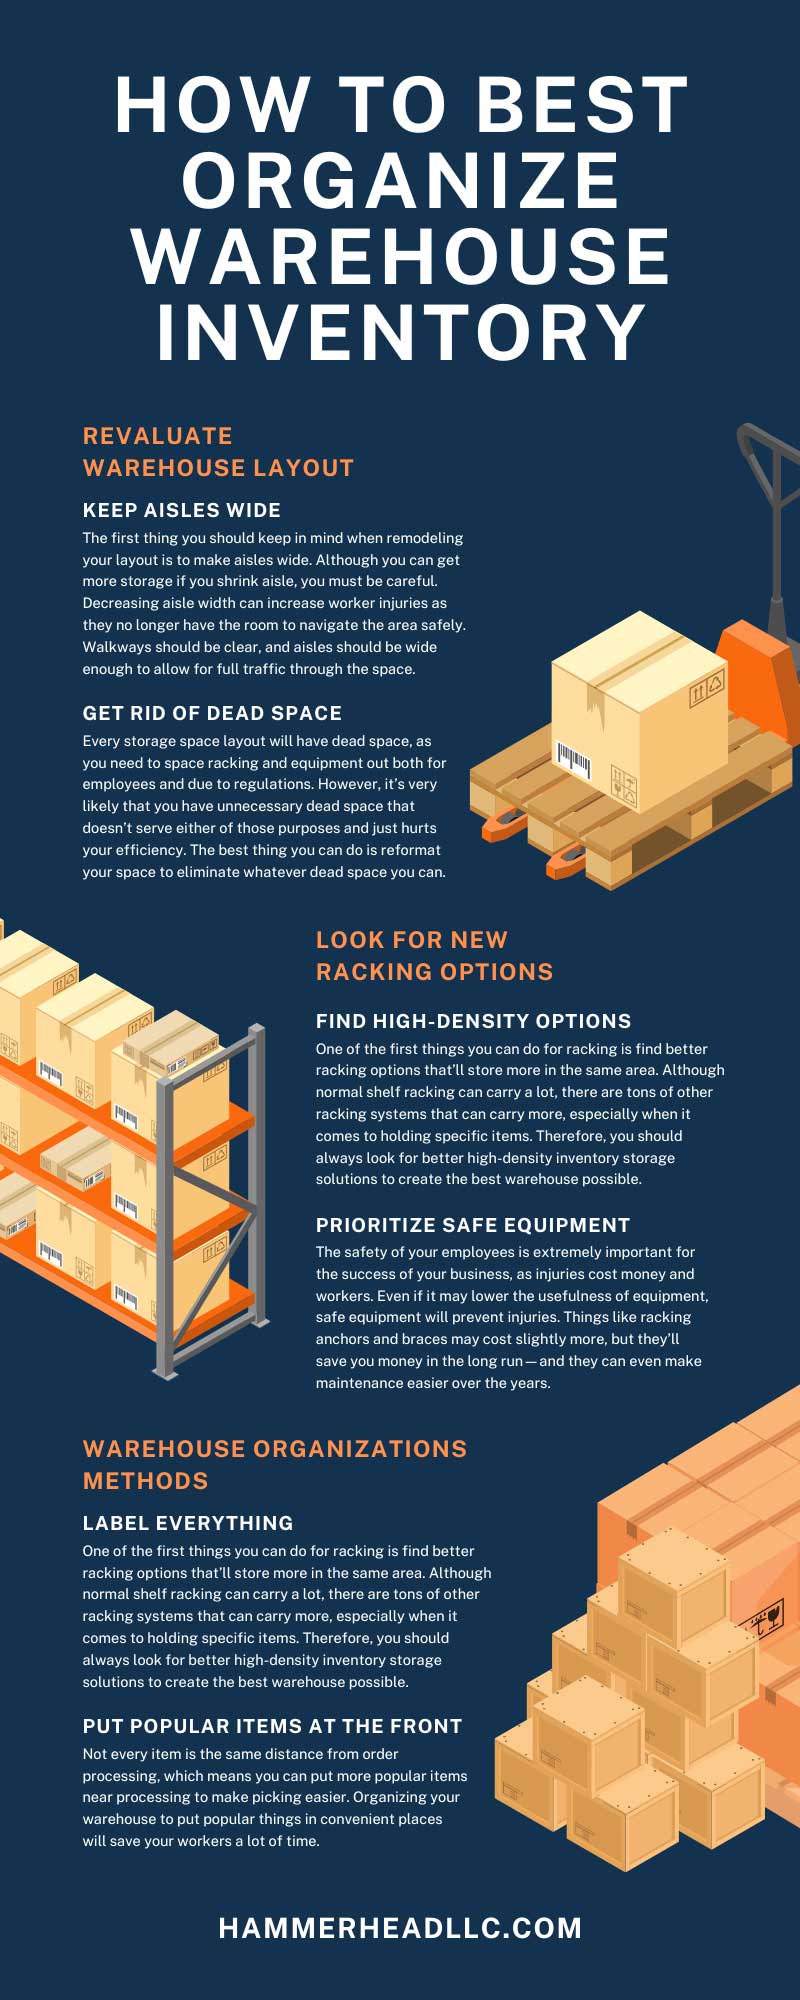 How To Best Organize Warehouse Inventory